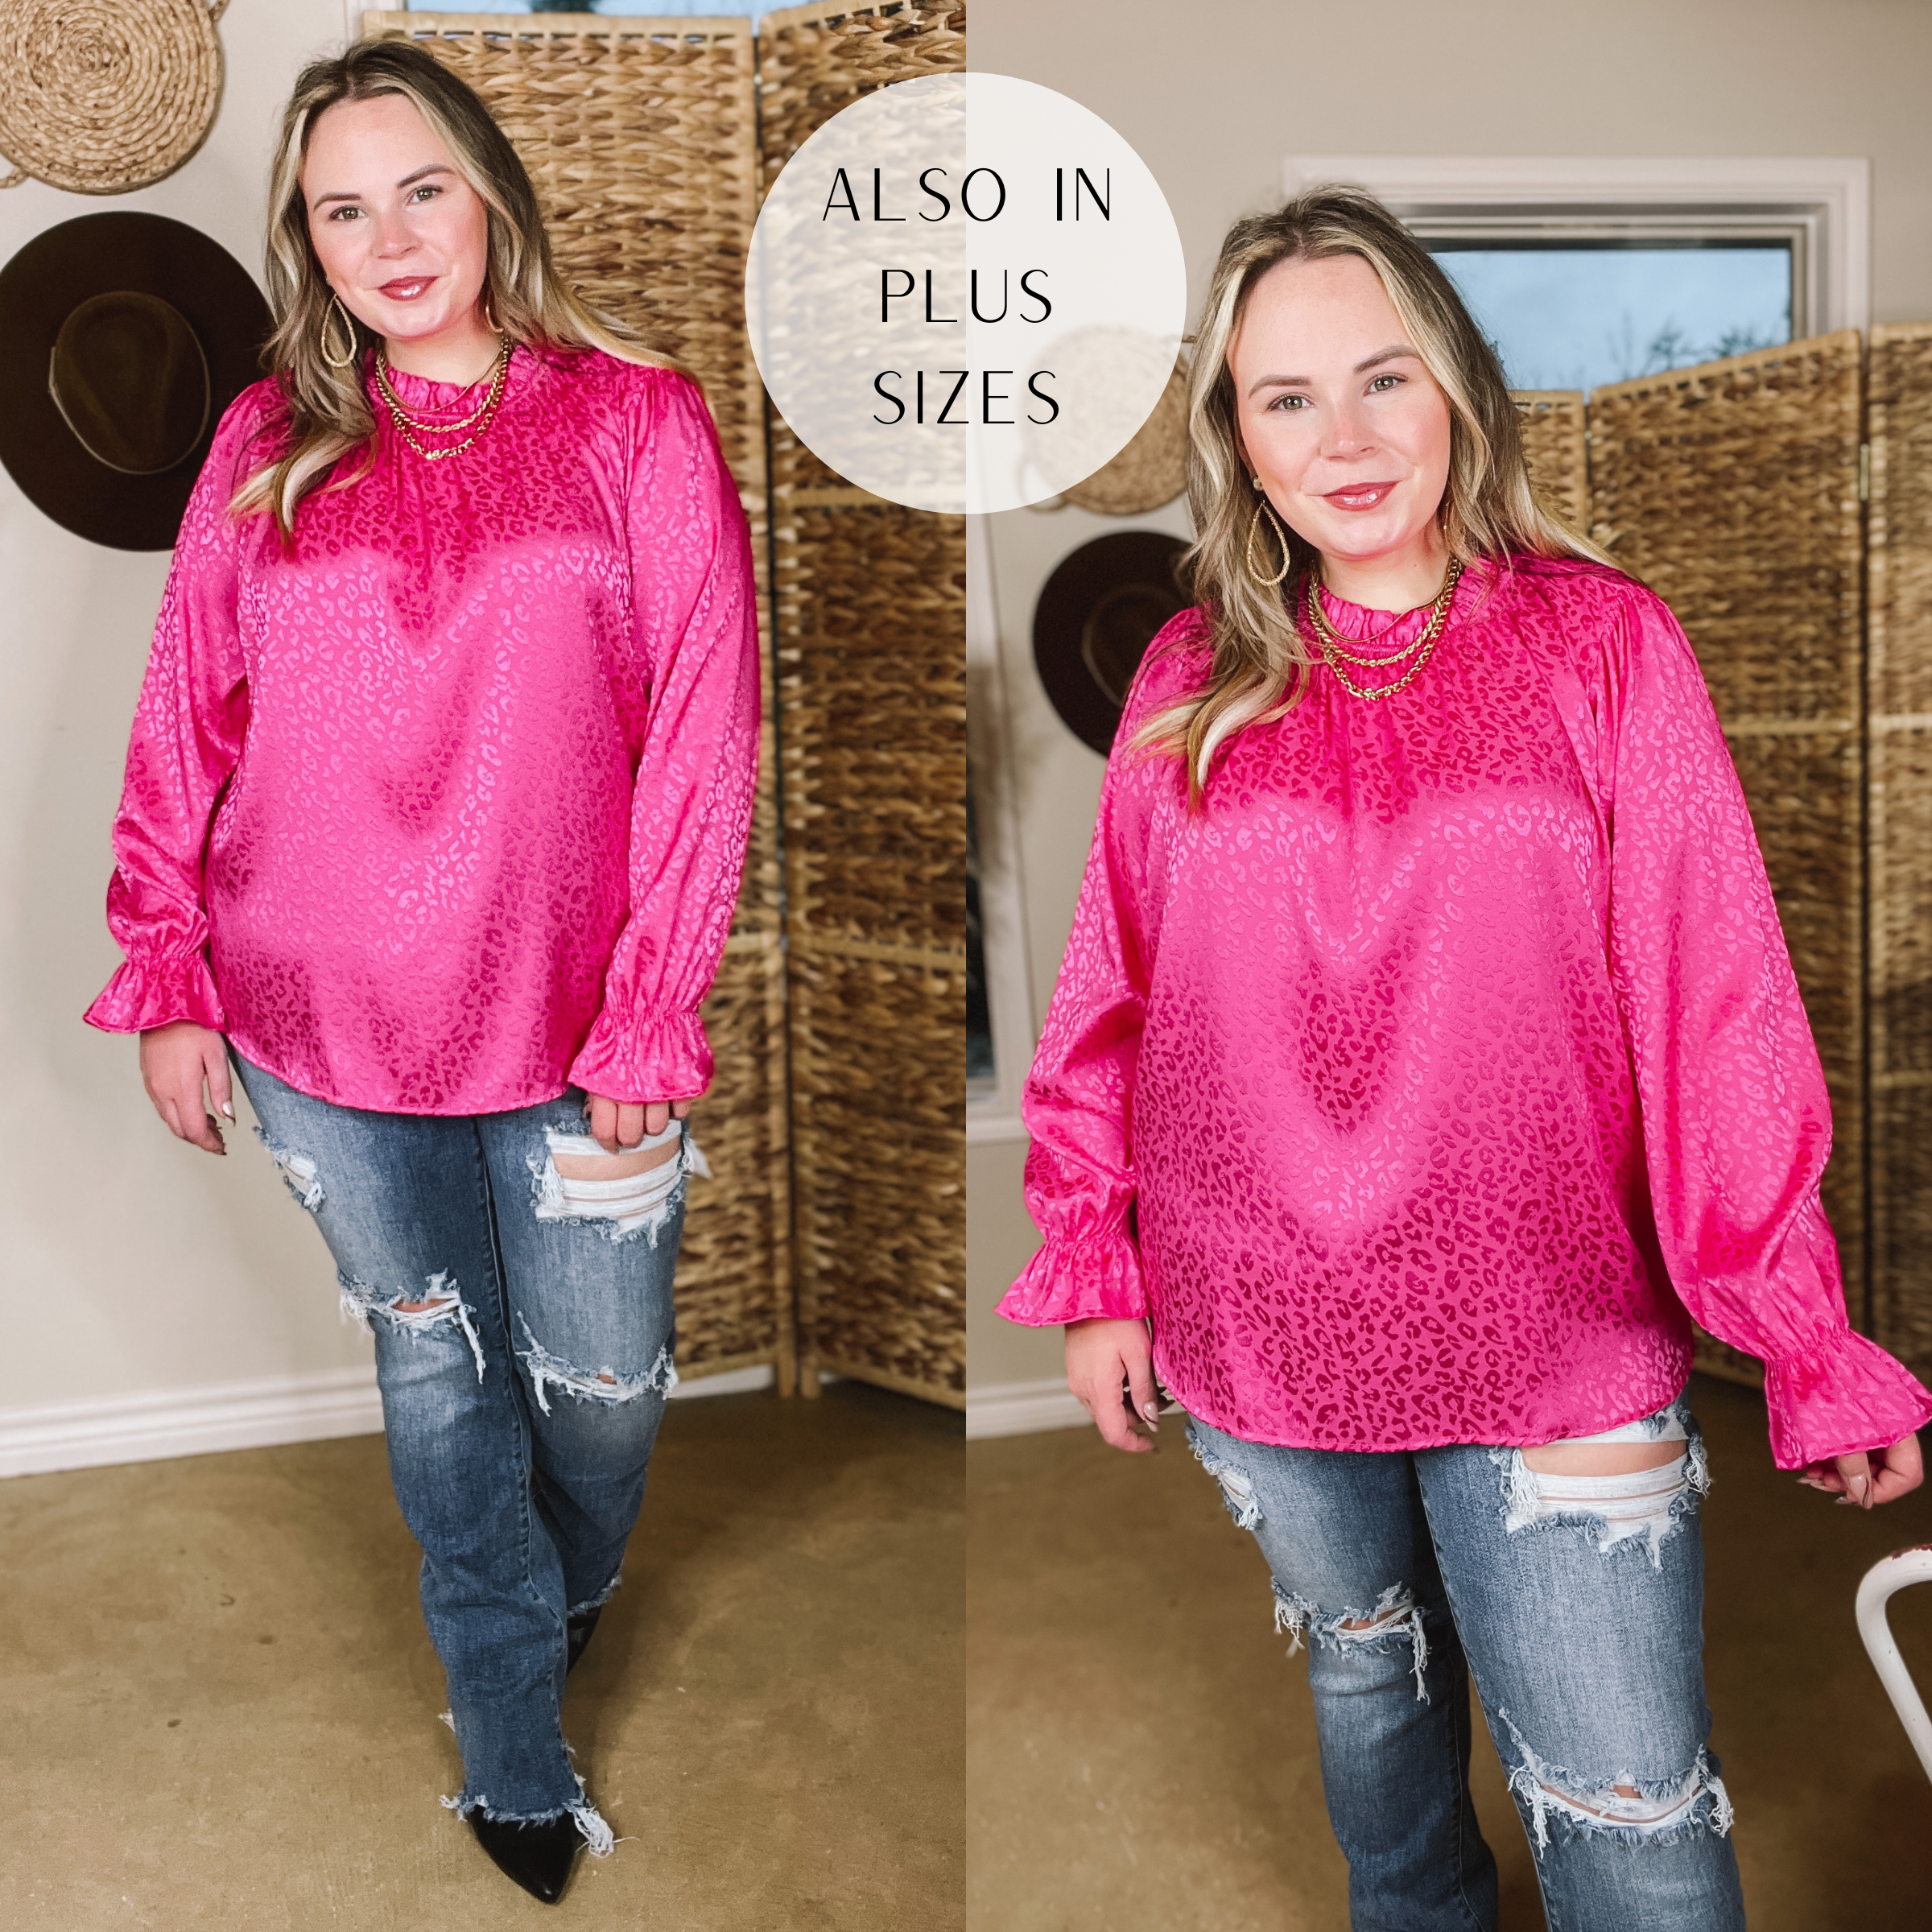 Model is wearing a hot pink satin long sleeve shirt in a leopard print with a ruffled detail around the wrist. Model has this top paired with distressed jeans and black booties with a gold necklace and earrings. Background is brown.